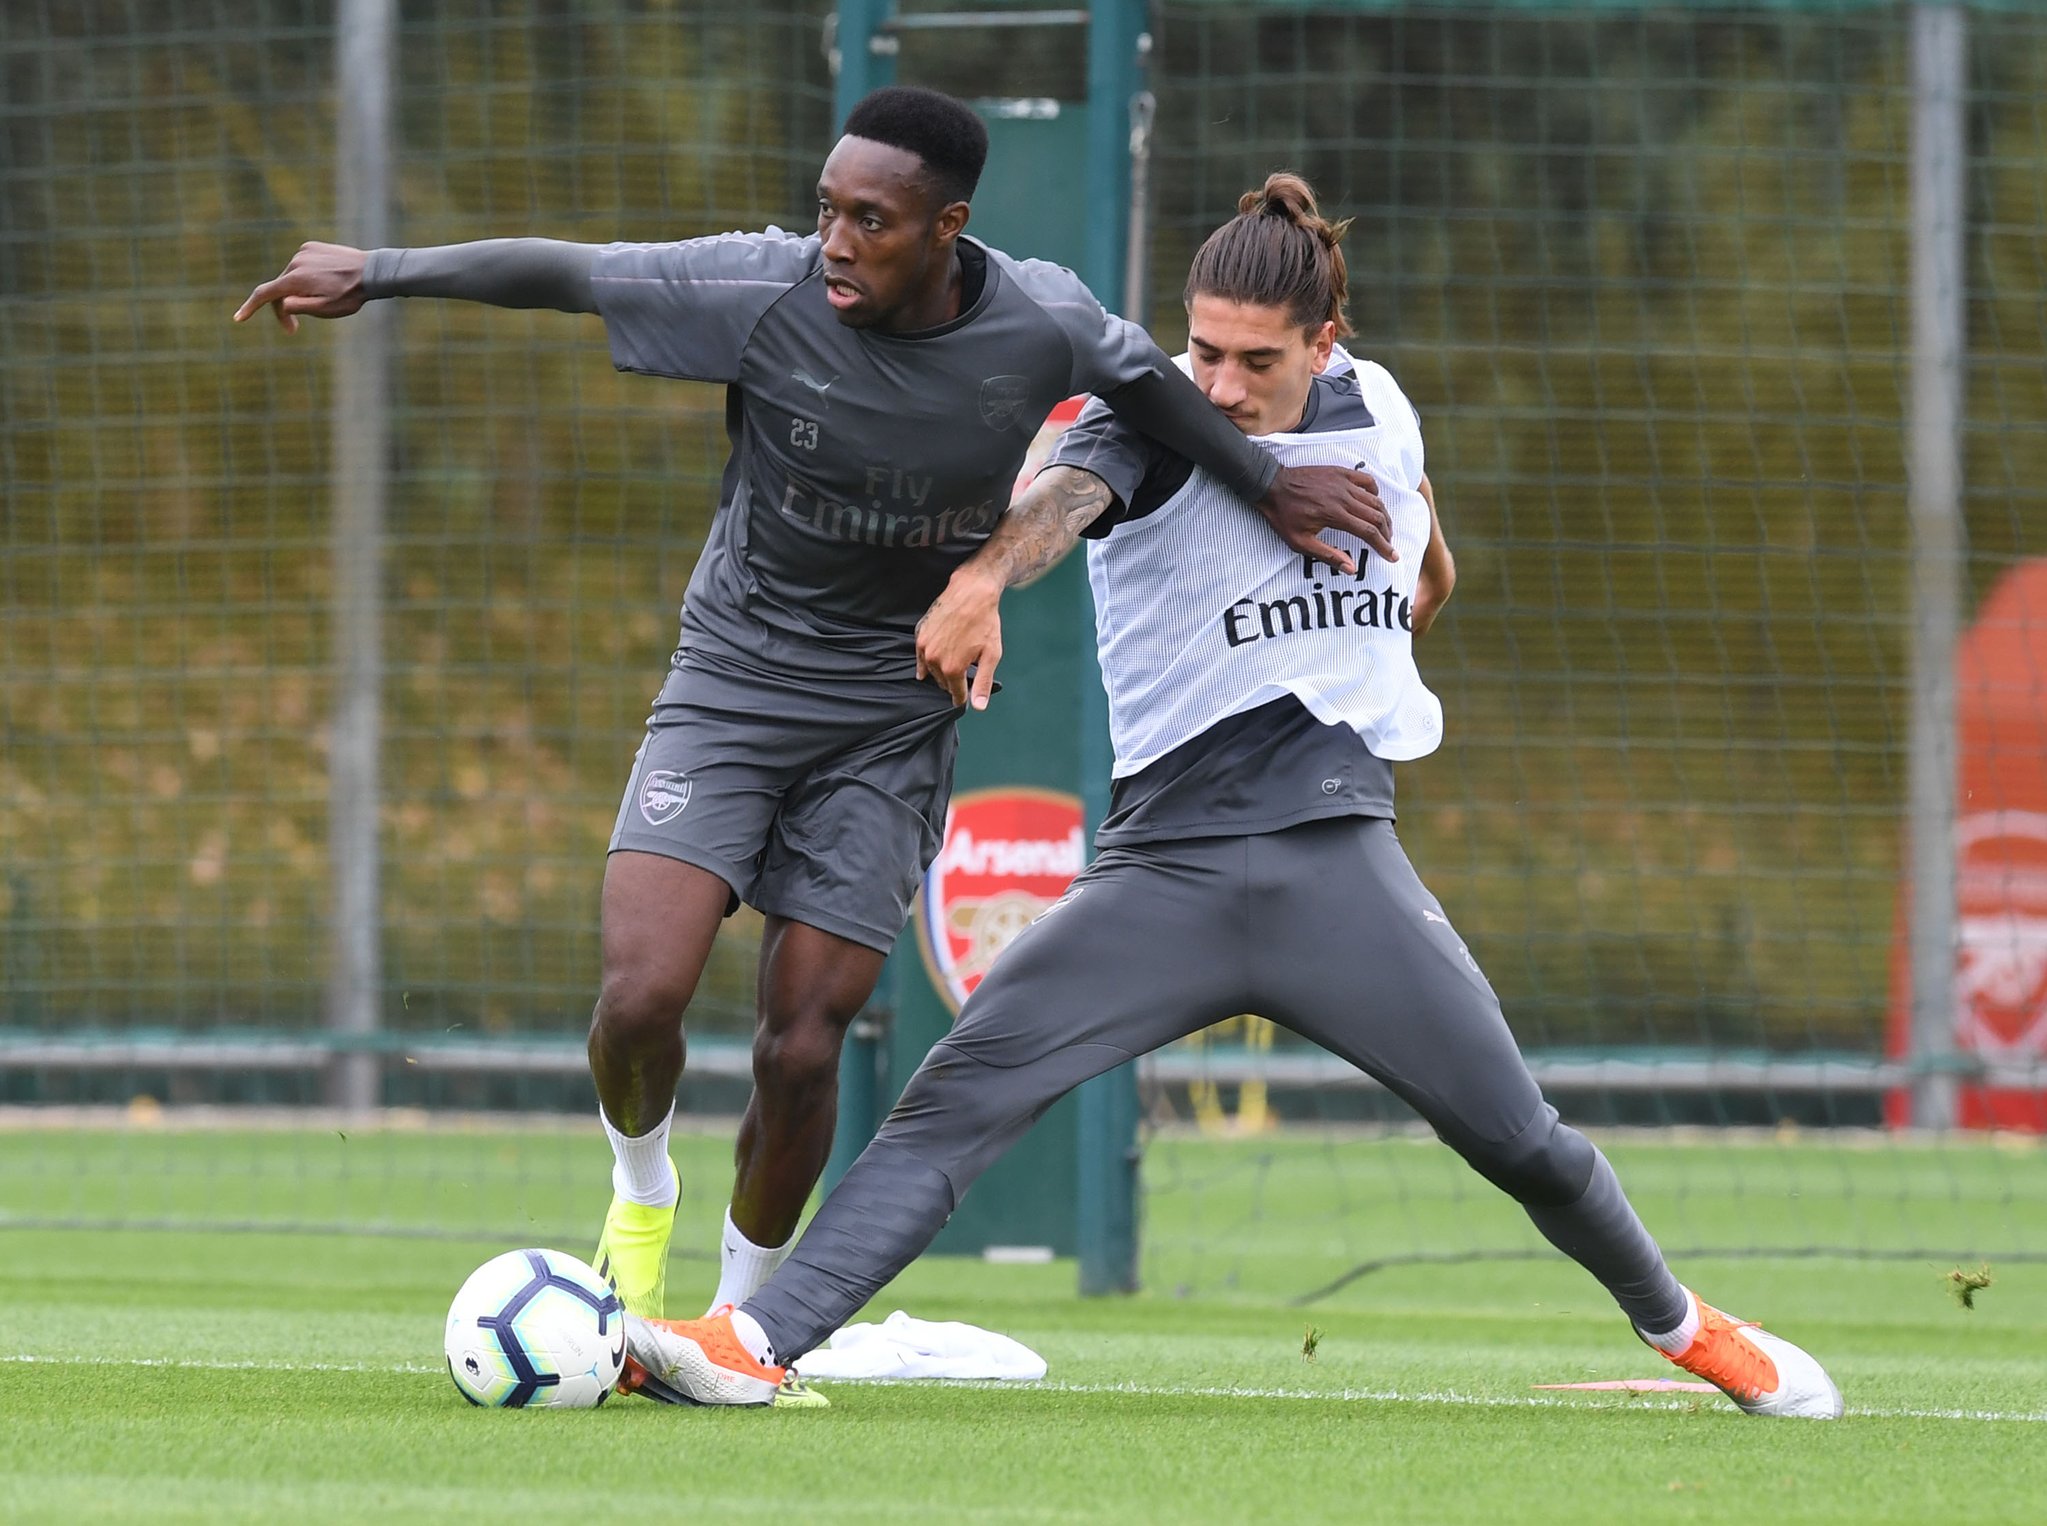 Welbeck and Bellerin in Arsenal training